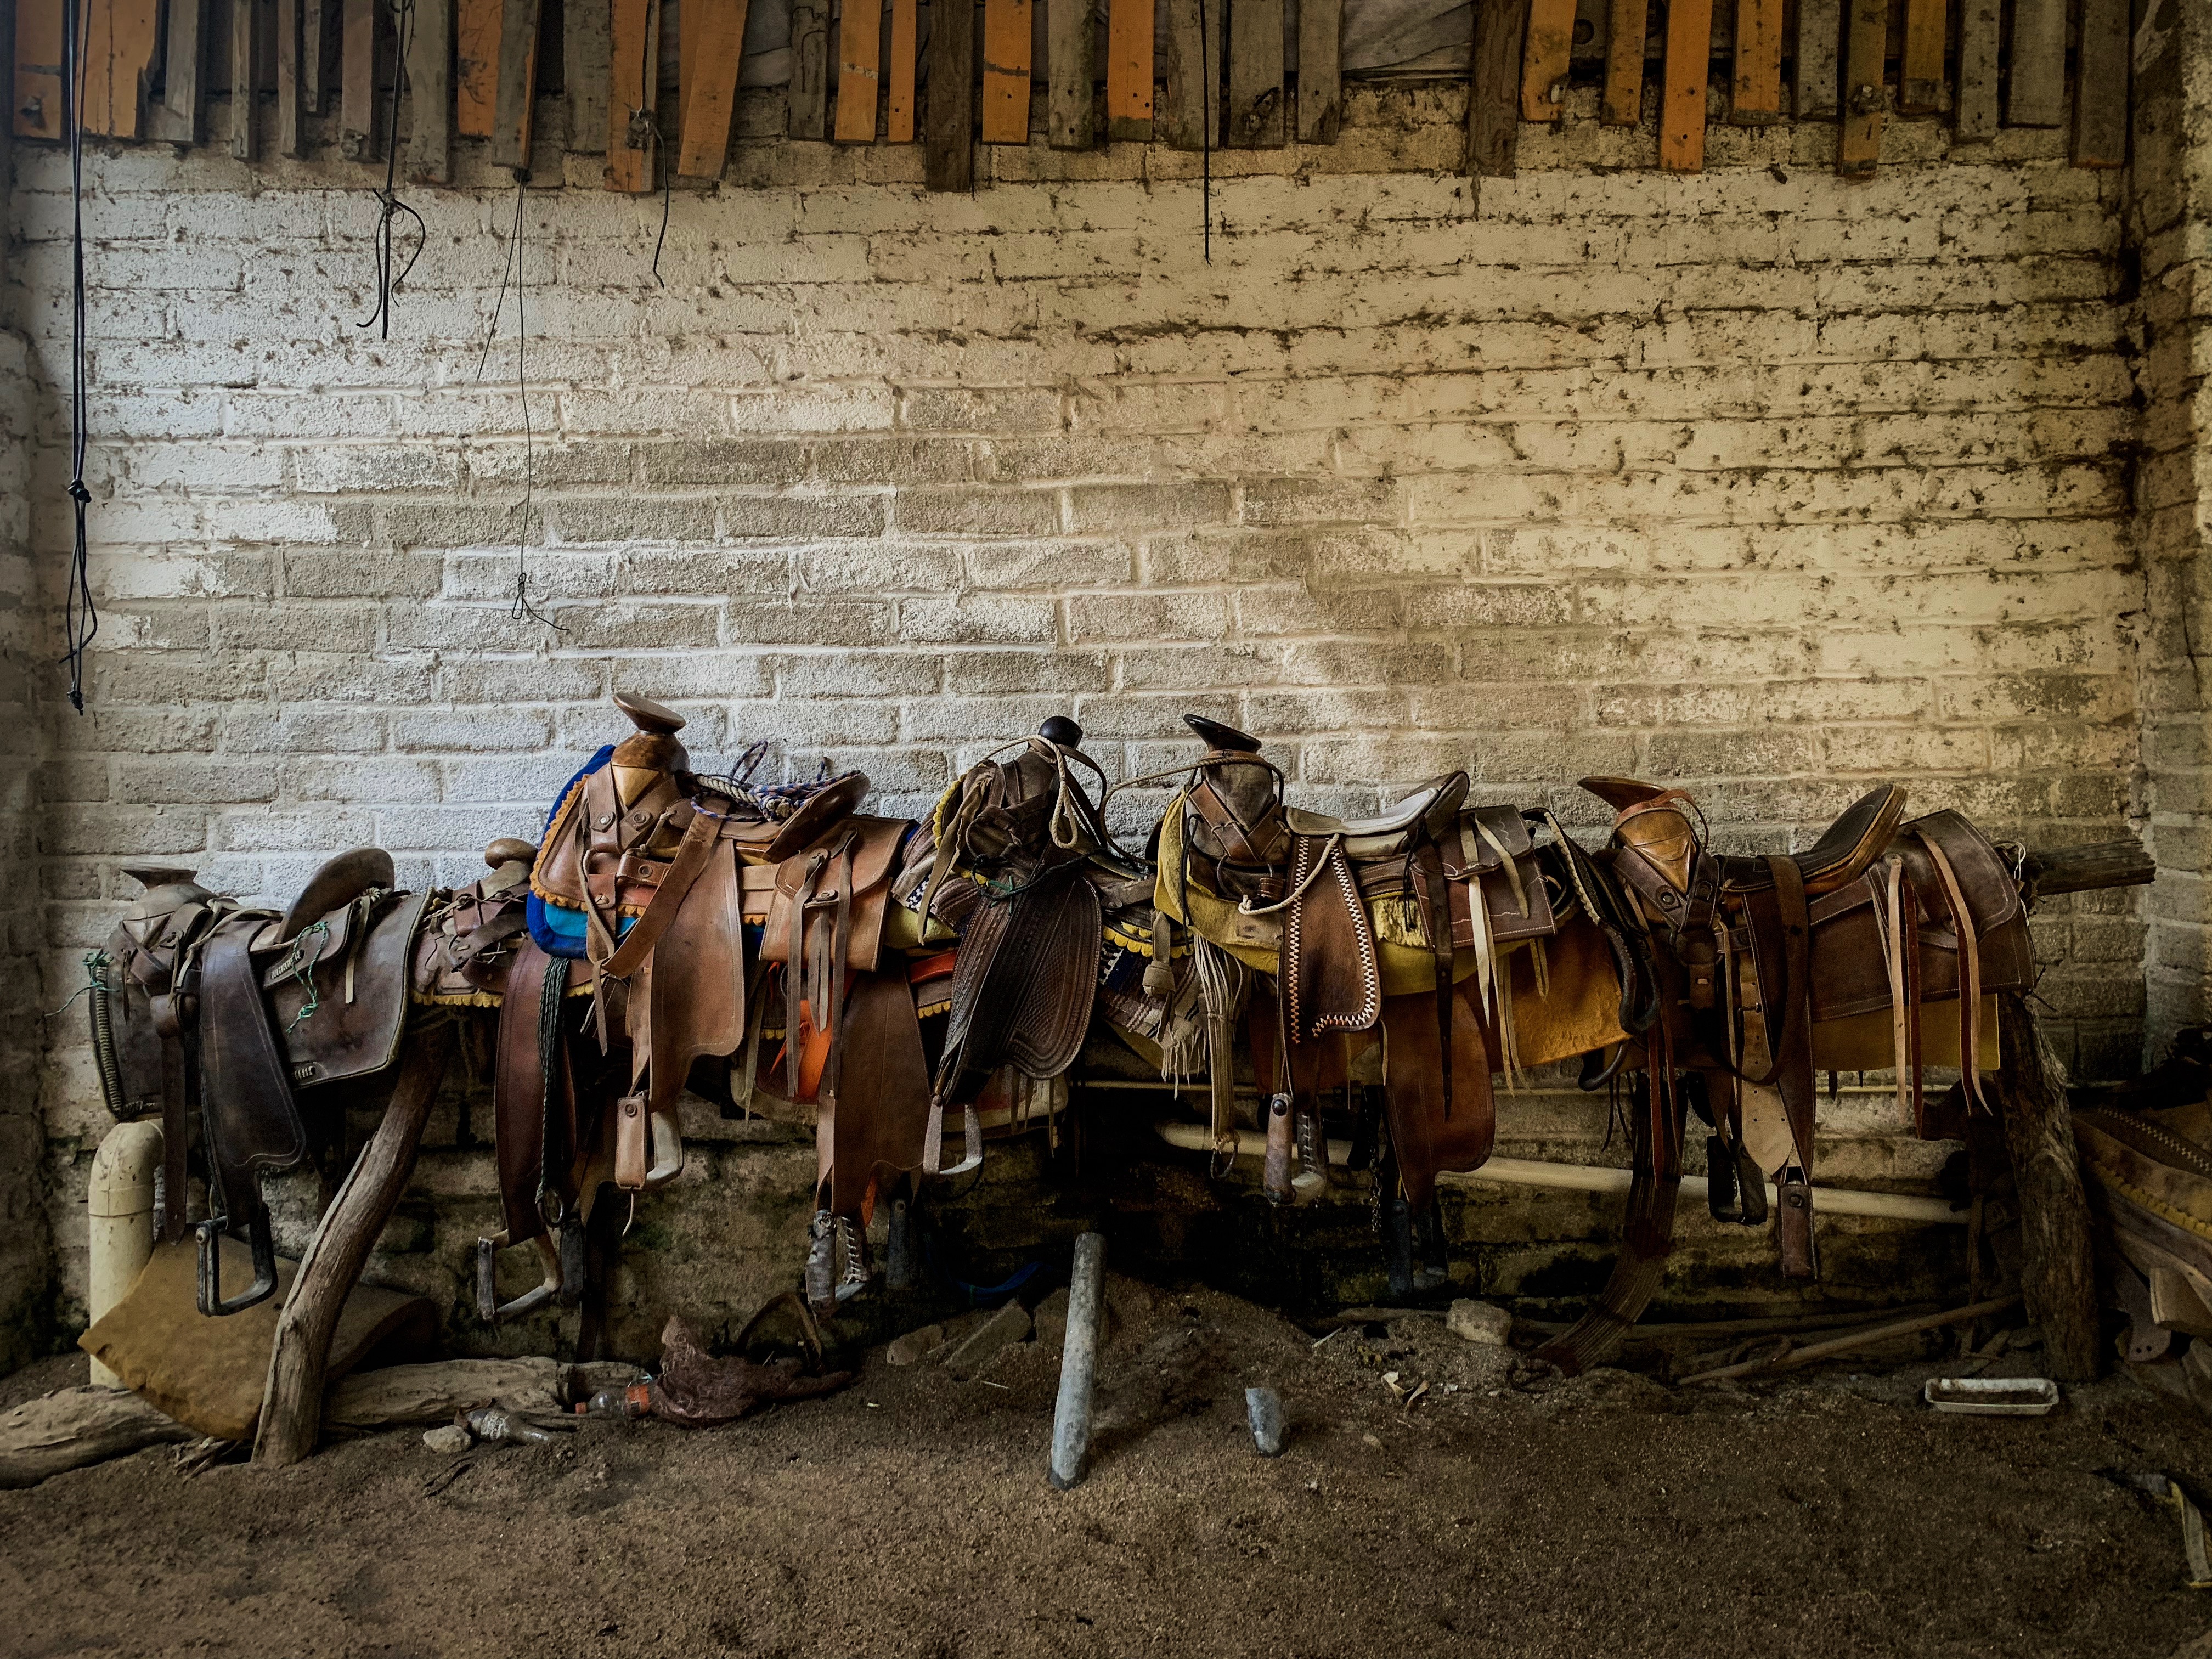 Saddles in a stable in the village of Yelapa